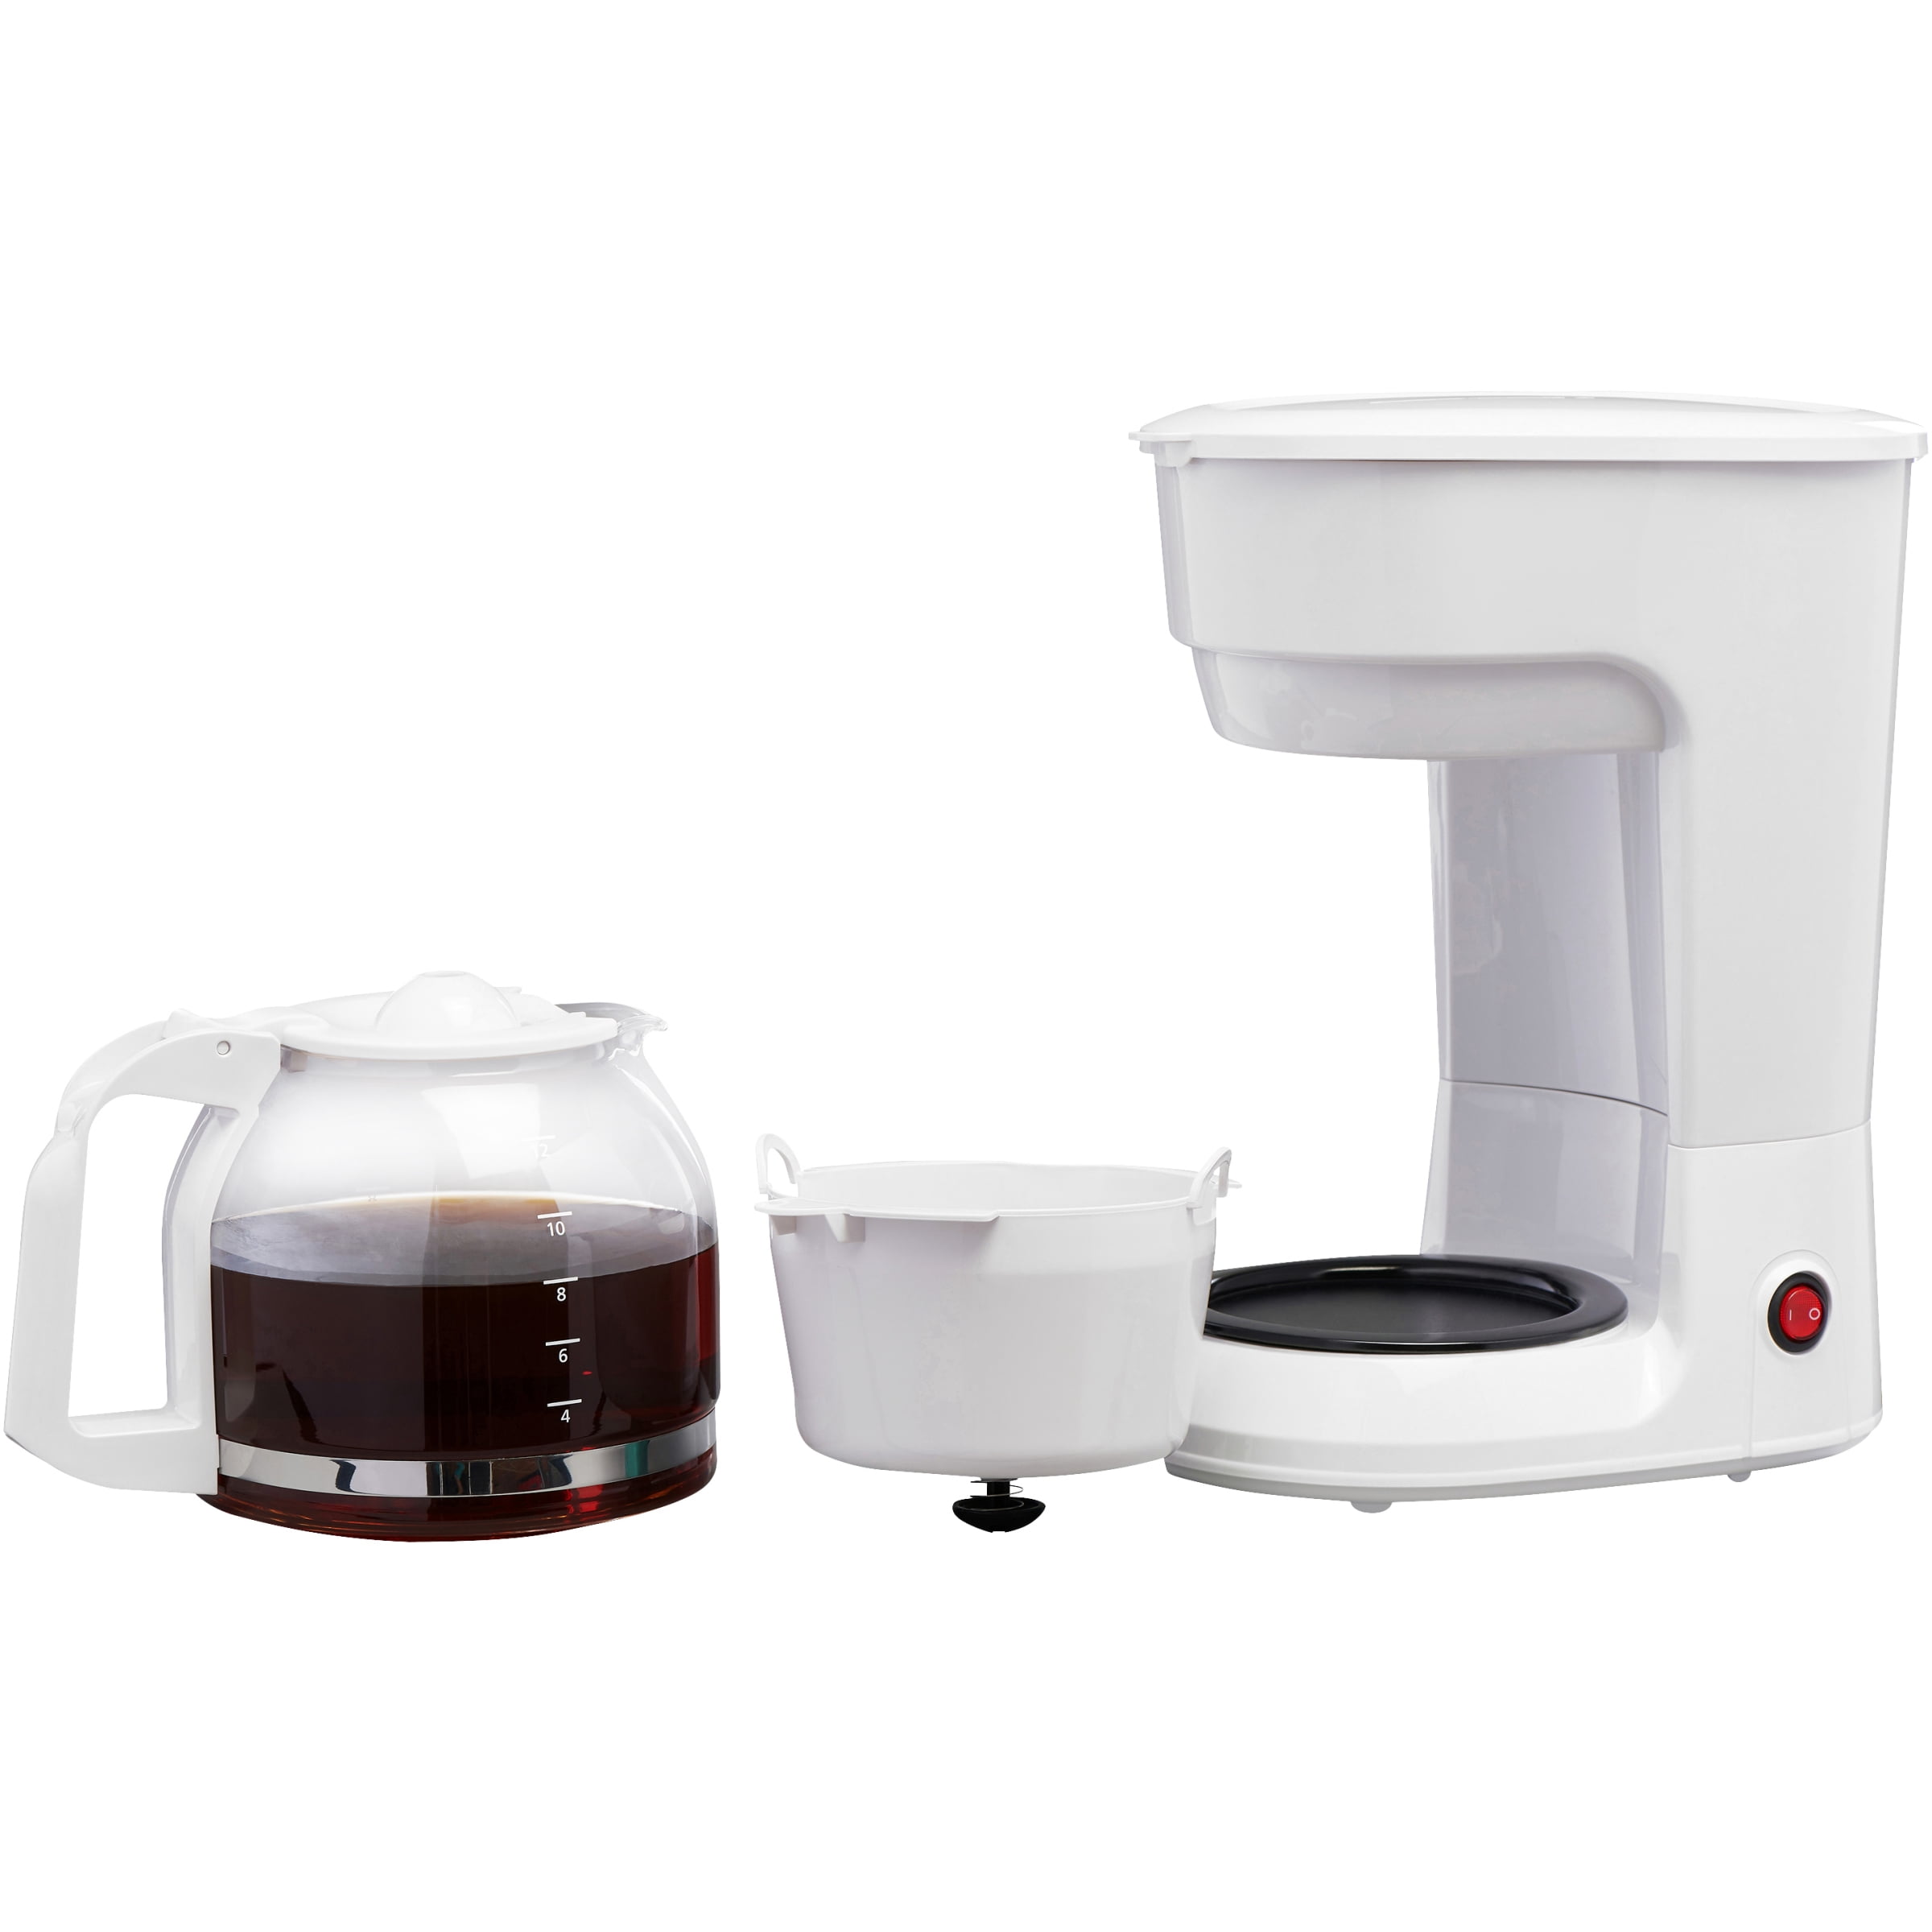 12 Cup Coffee Maker (white) - Model 43531